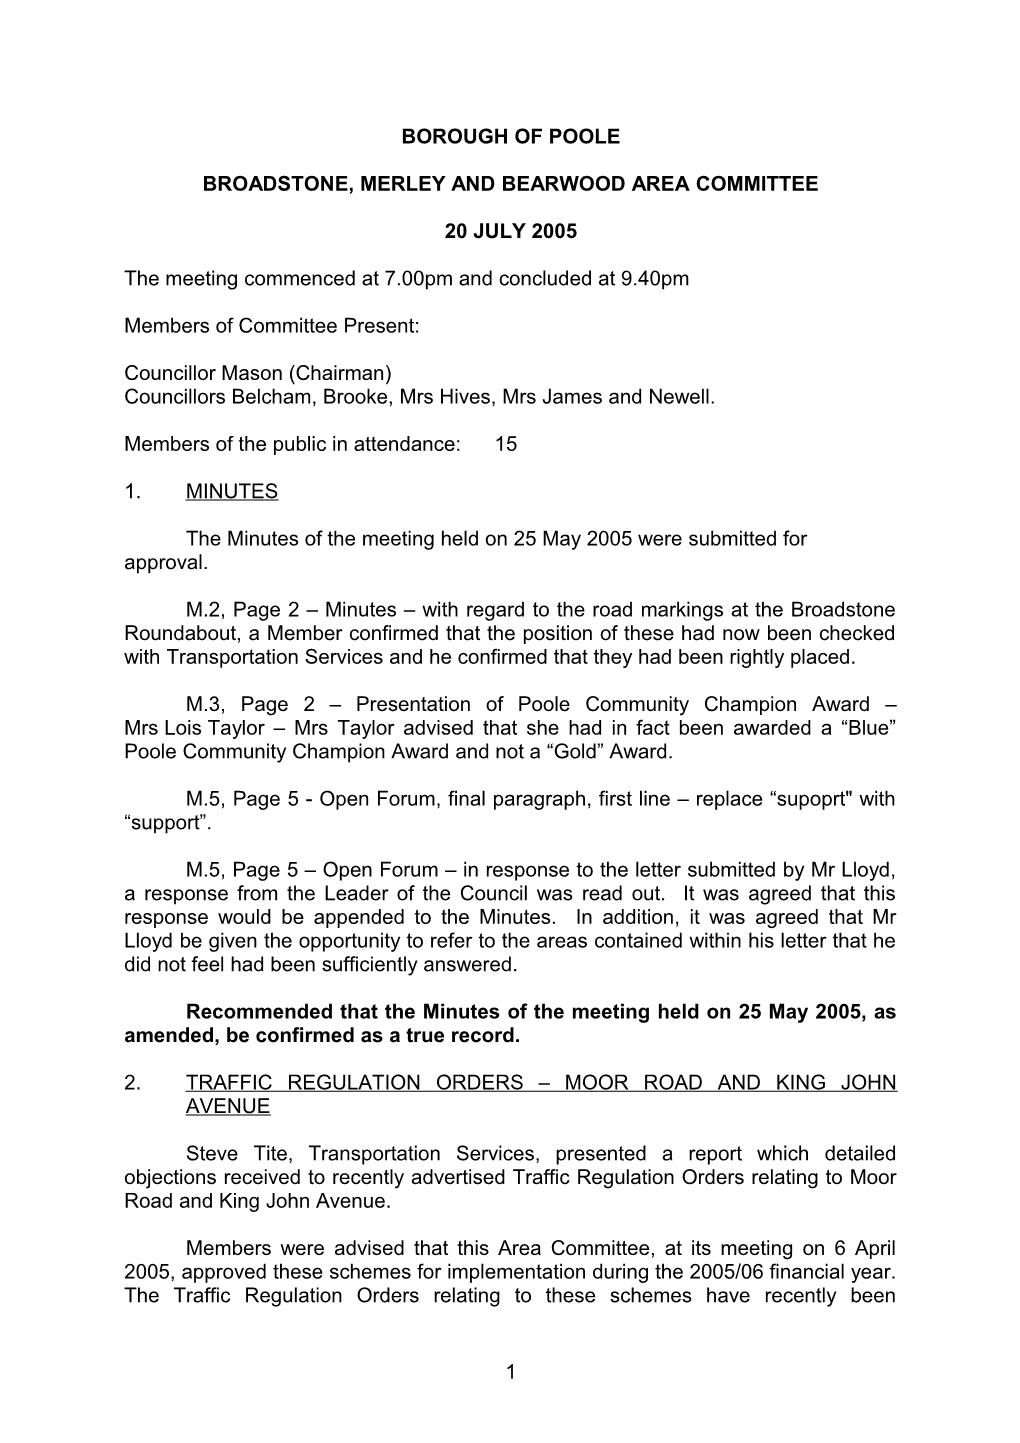 Minutes - Broadstone, Merley and Bearwood Area Committee - 20 July 2005